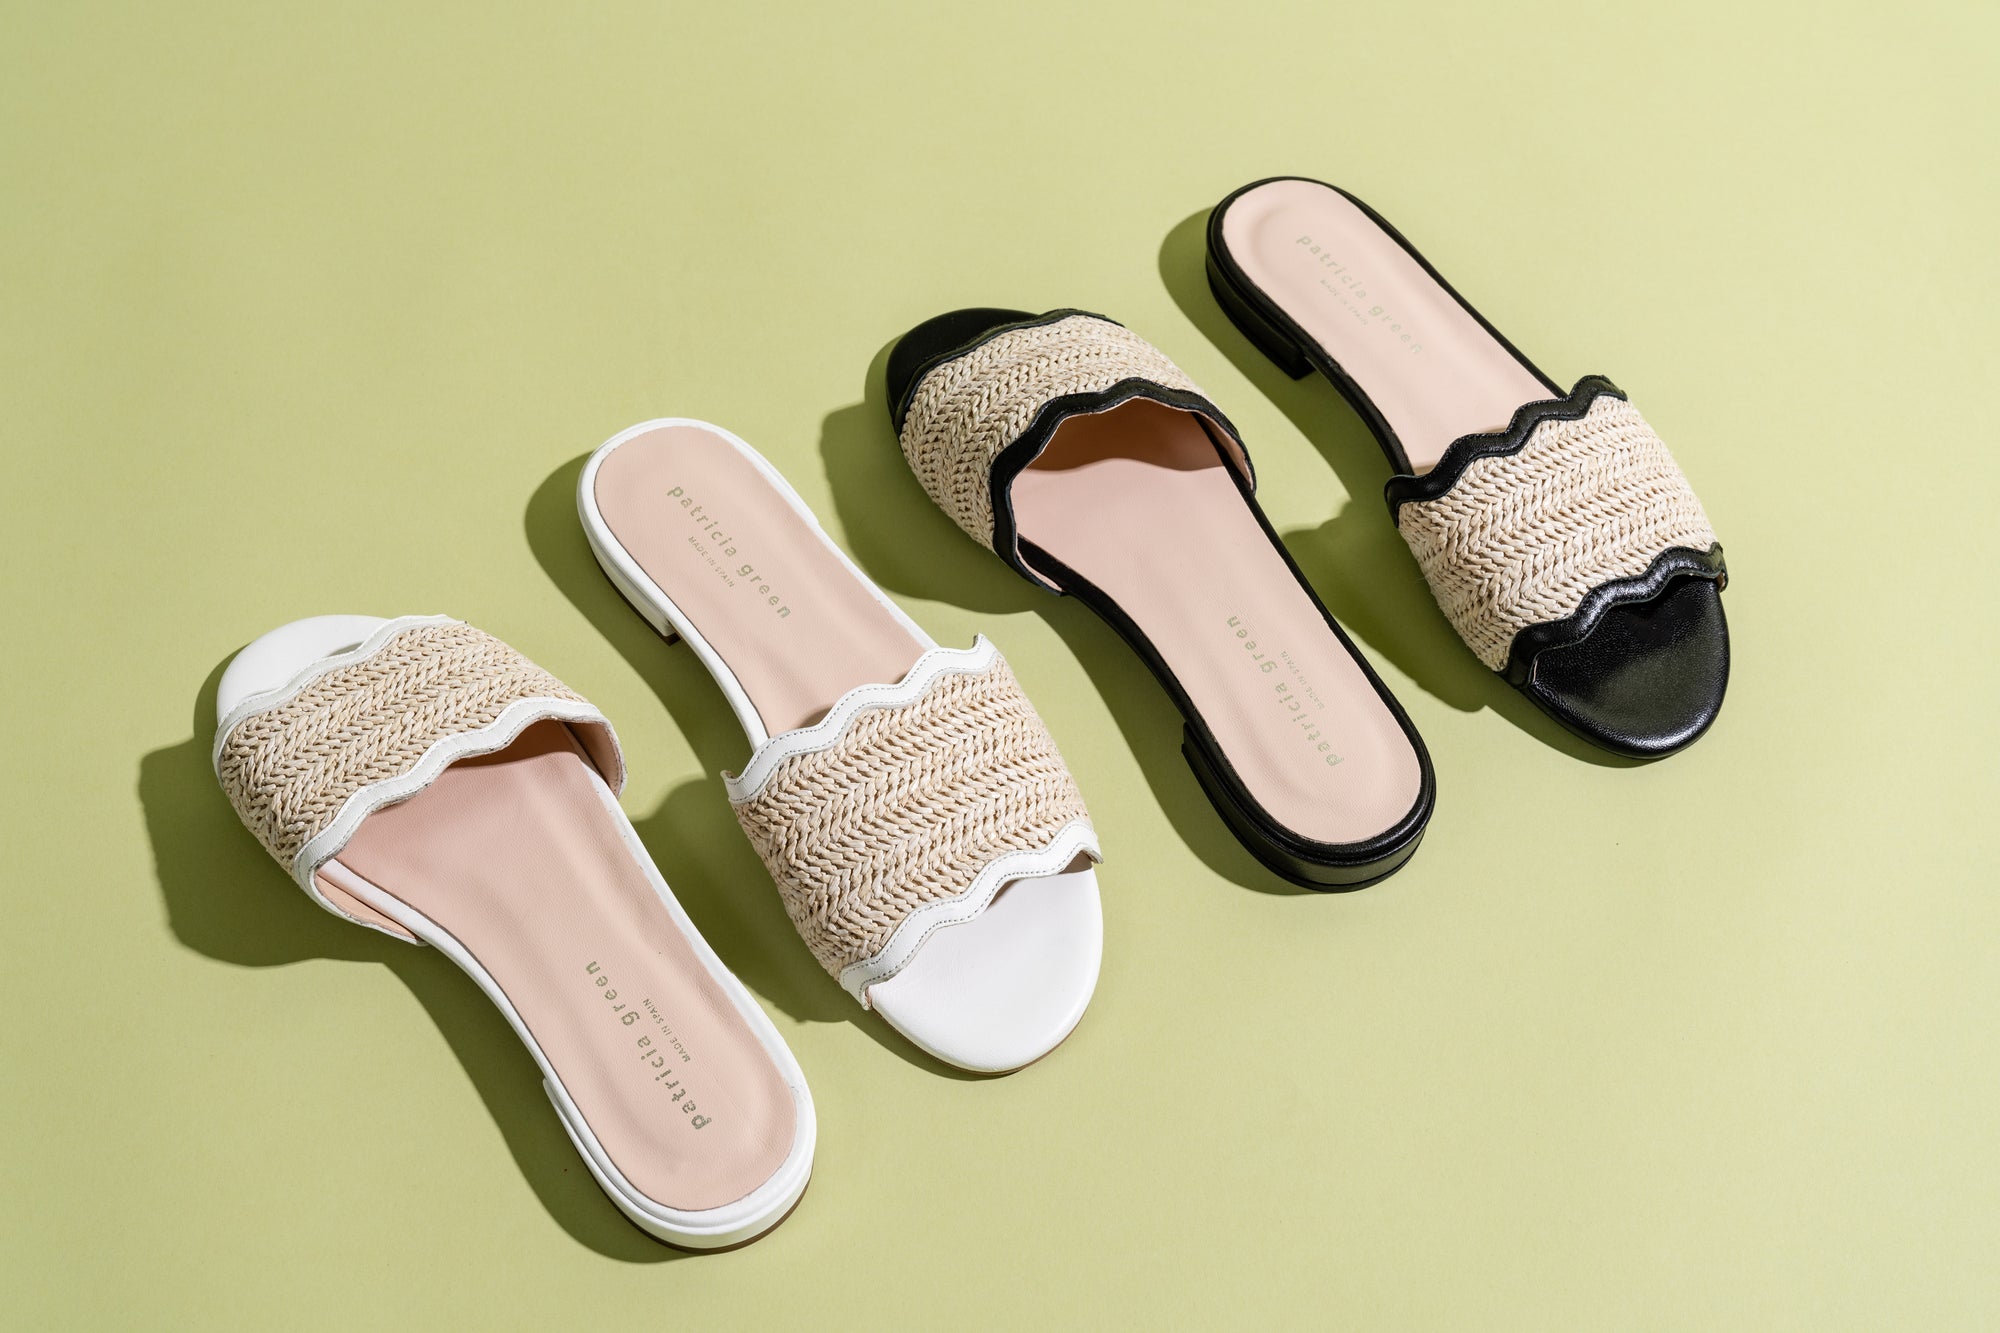 The SimplySoles Resort Collection of new footwear arrivals from Spain